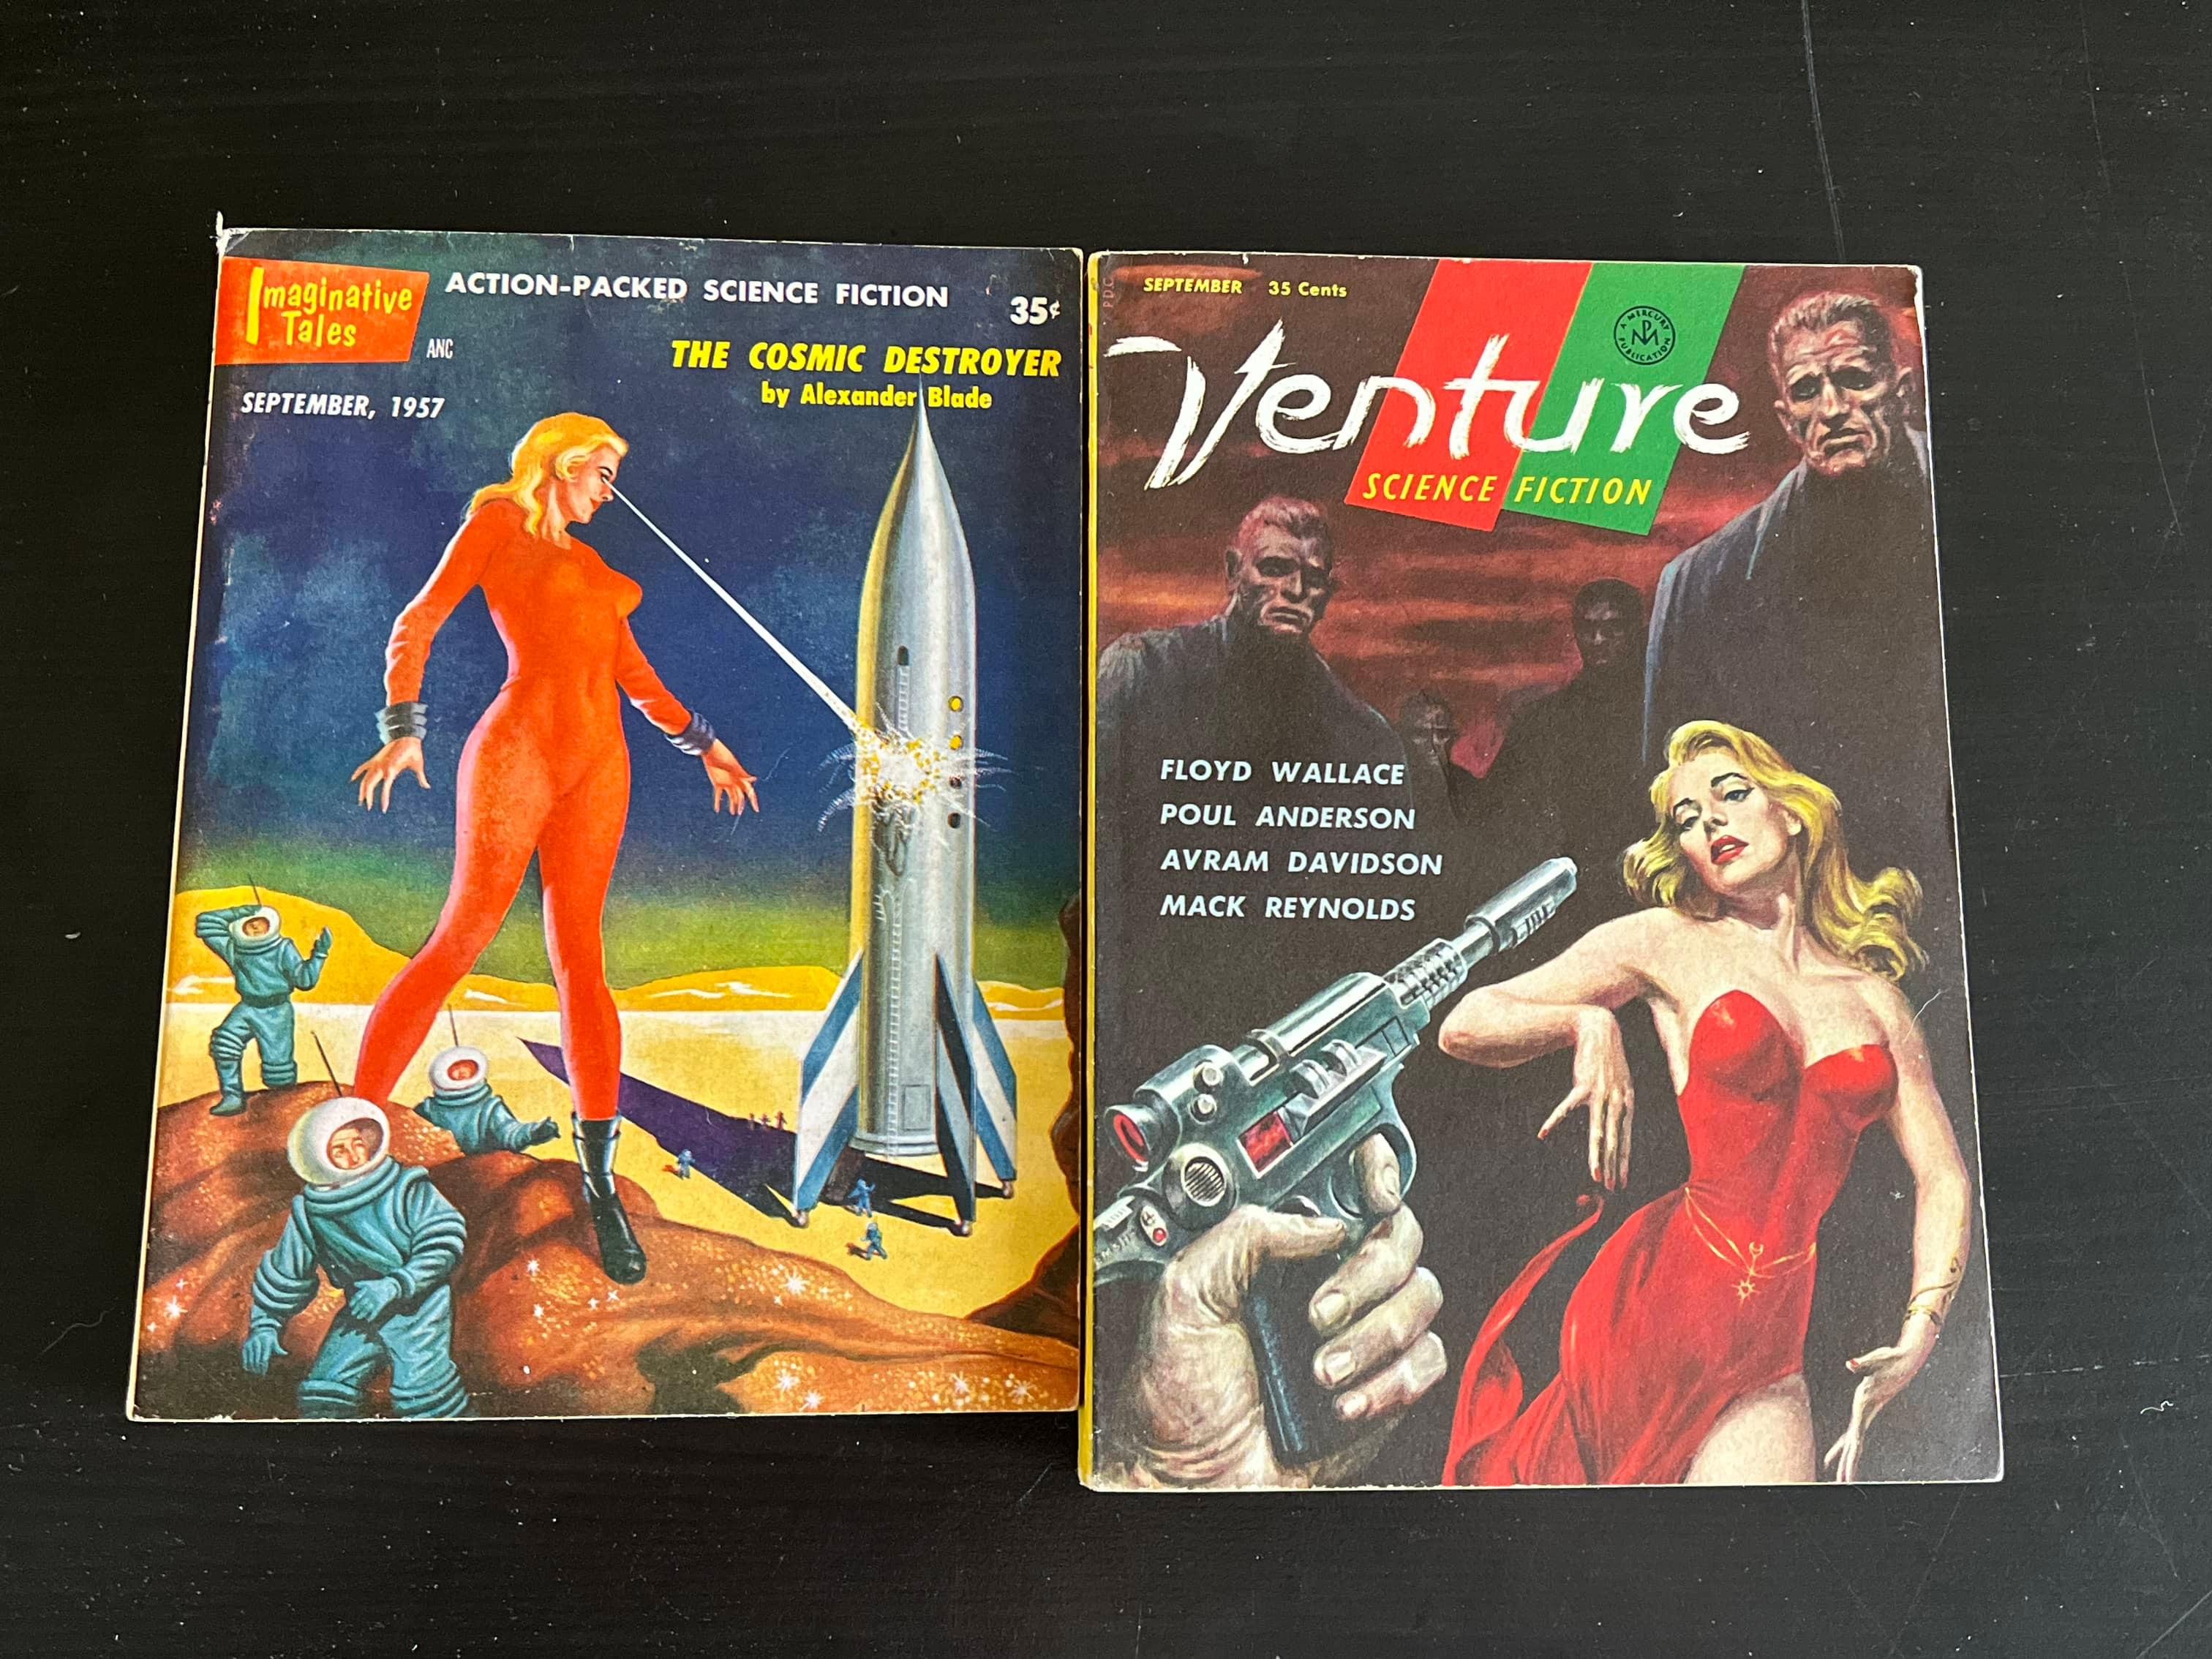 Group of (2) 1957 Pulps with Pin-Up Covers